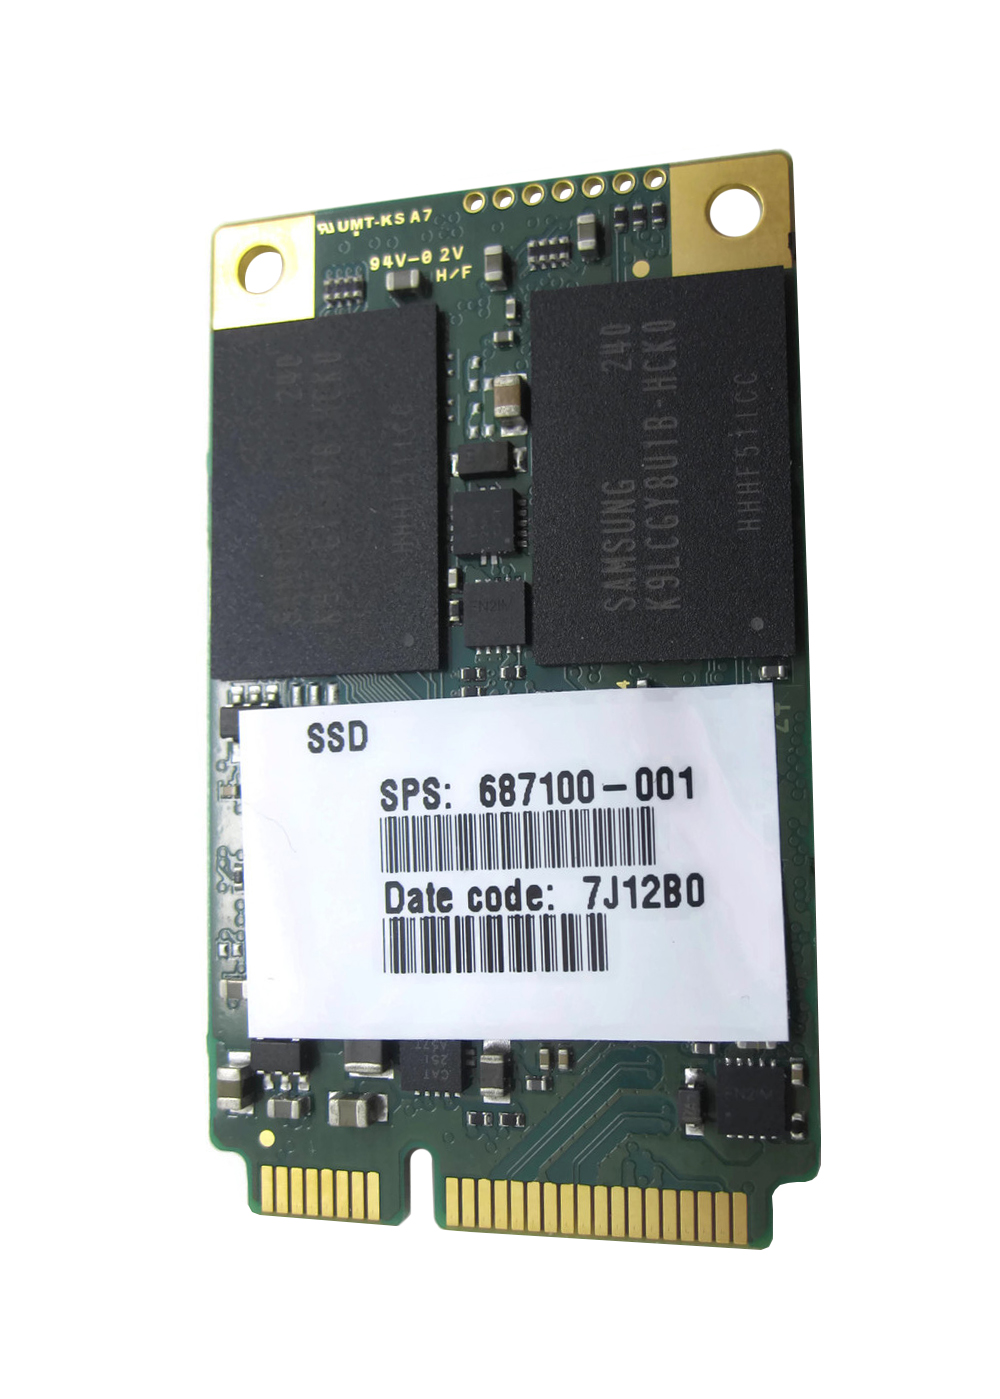 687100-001 HP 32GB MLC SATA 6Gbps mSATA Internal Solid State Drive (SSD) for Envy Ultrabook 4-1000 and 6-1000